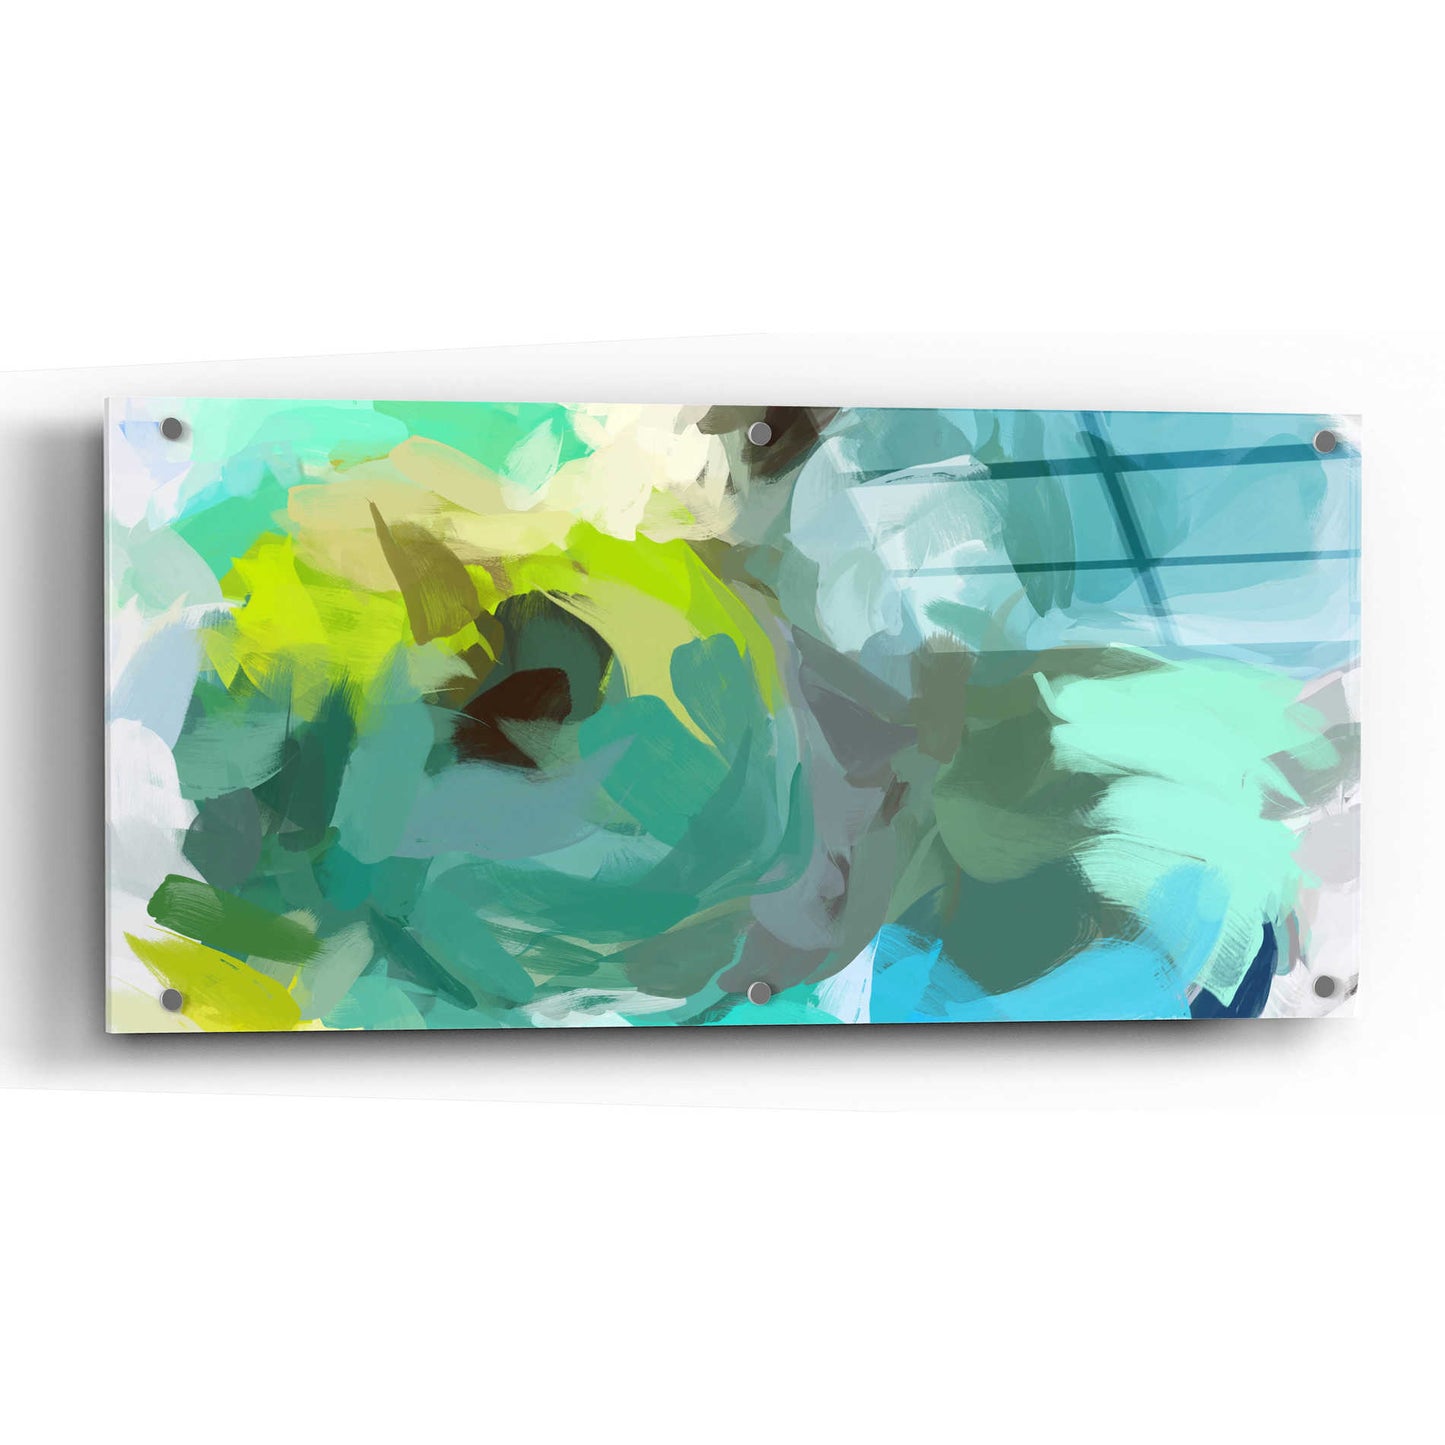 Epic Art 'The Shades of Green Abstract 2' by Irena Orlov,  Acrylic Glass Wall Art,48x24